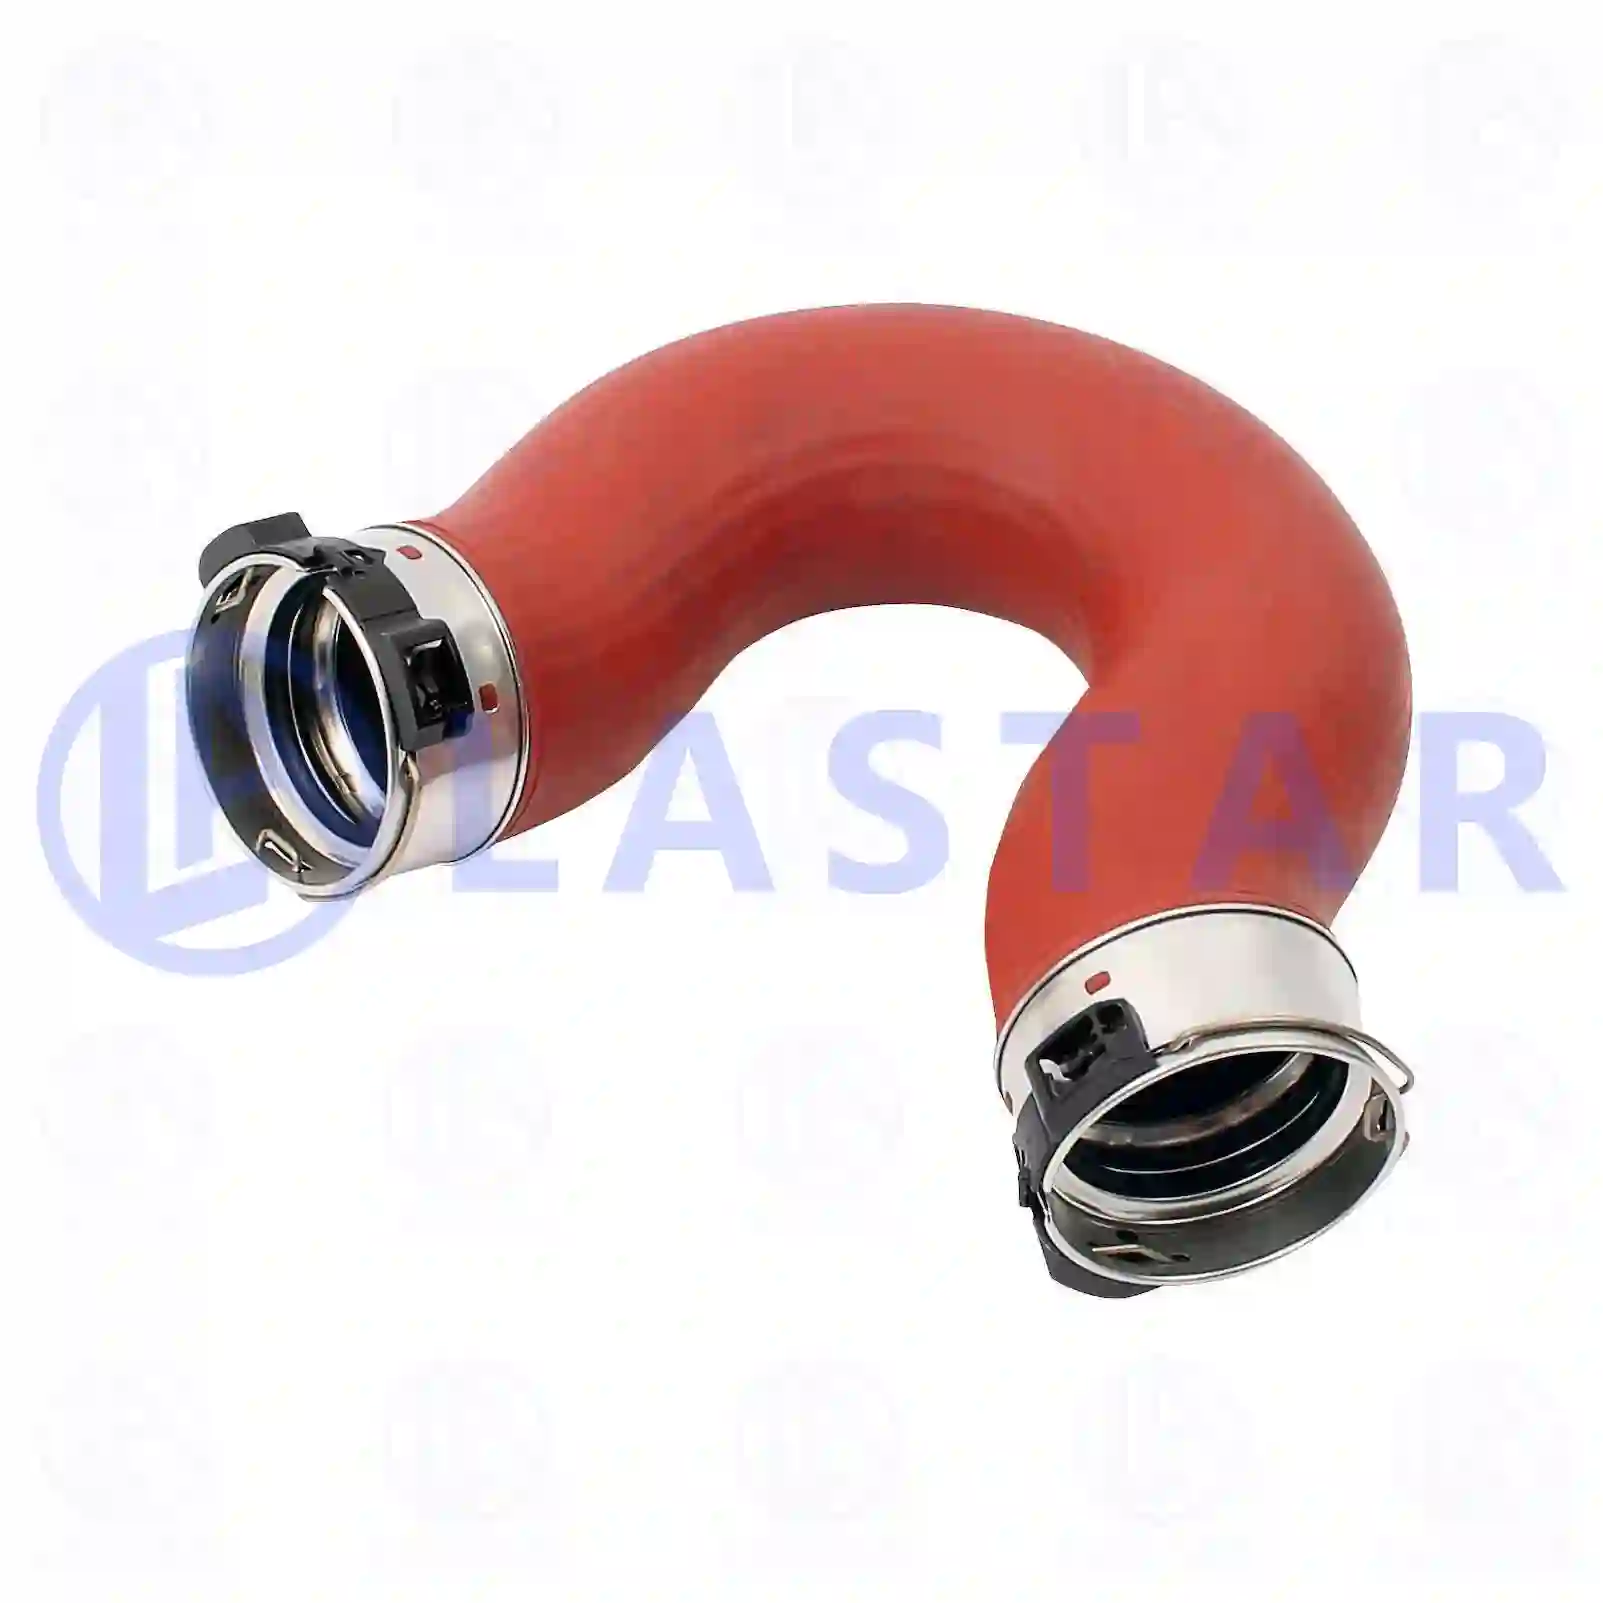 Charge air hose, 77708425, 9065285082 ||  77708425 Lastar Spare Part | Truck Spare Parts, Auotomotive Spare Parts Charge air hose, 77708425, 9065285082 ||  77708425 Lastar Spare Part | Truck Spare Parts, Auotomotive Spare Parts